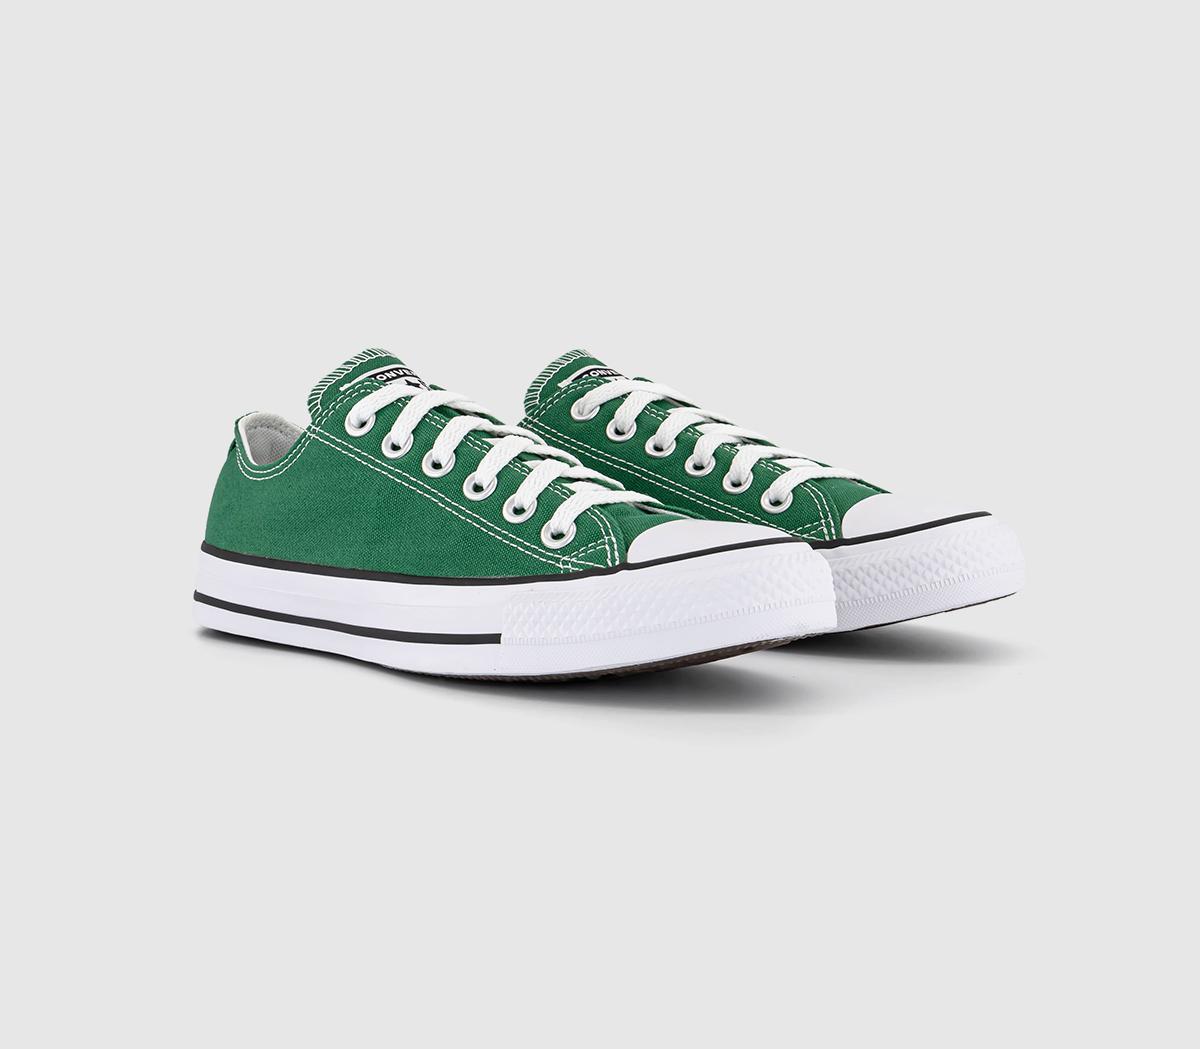 Converse All Star Low Trainers Amazon Green, 10